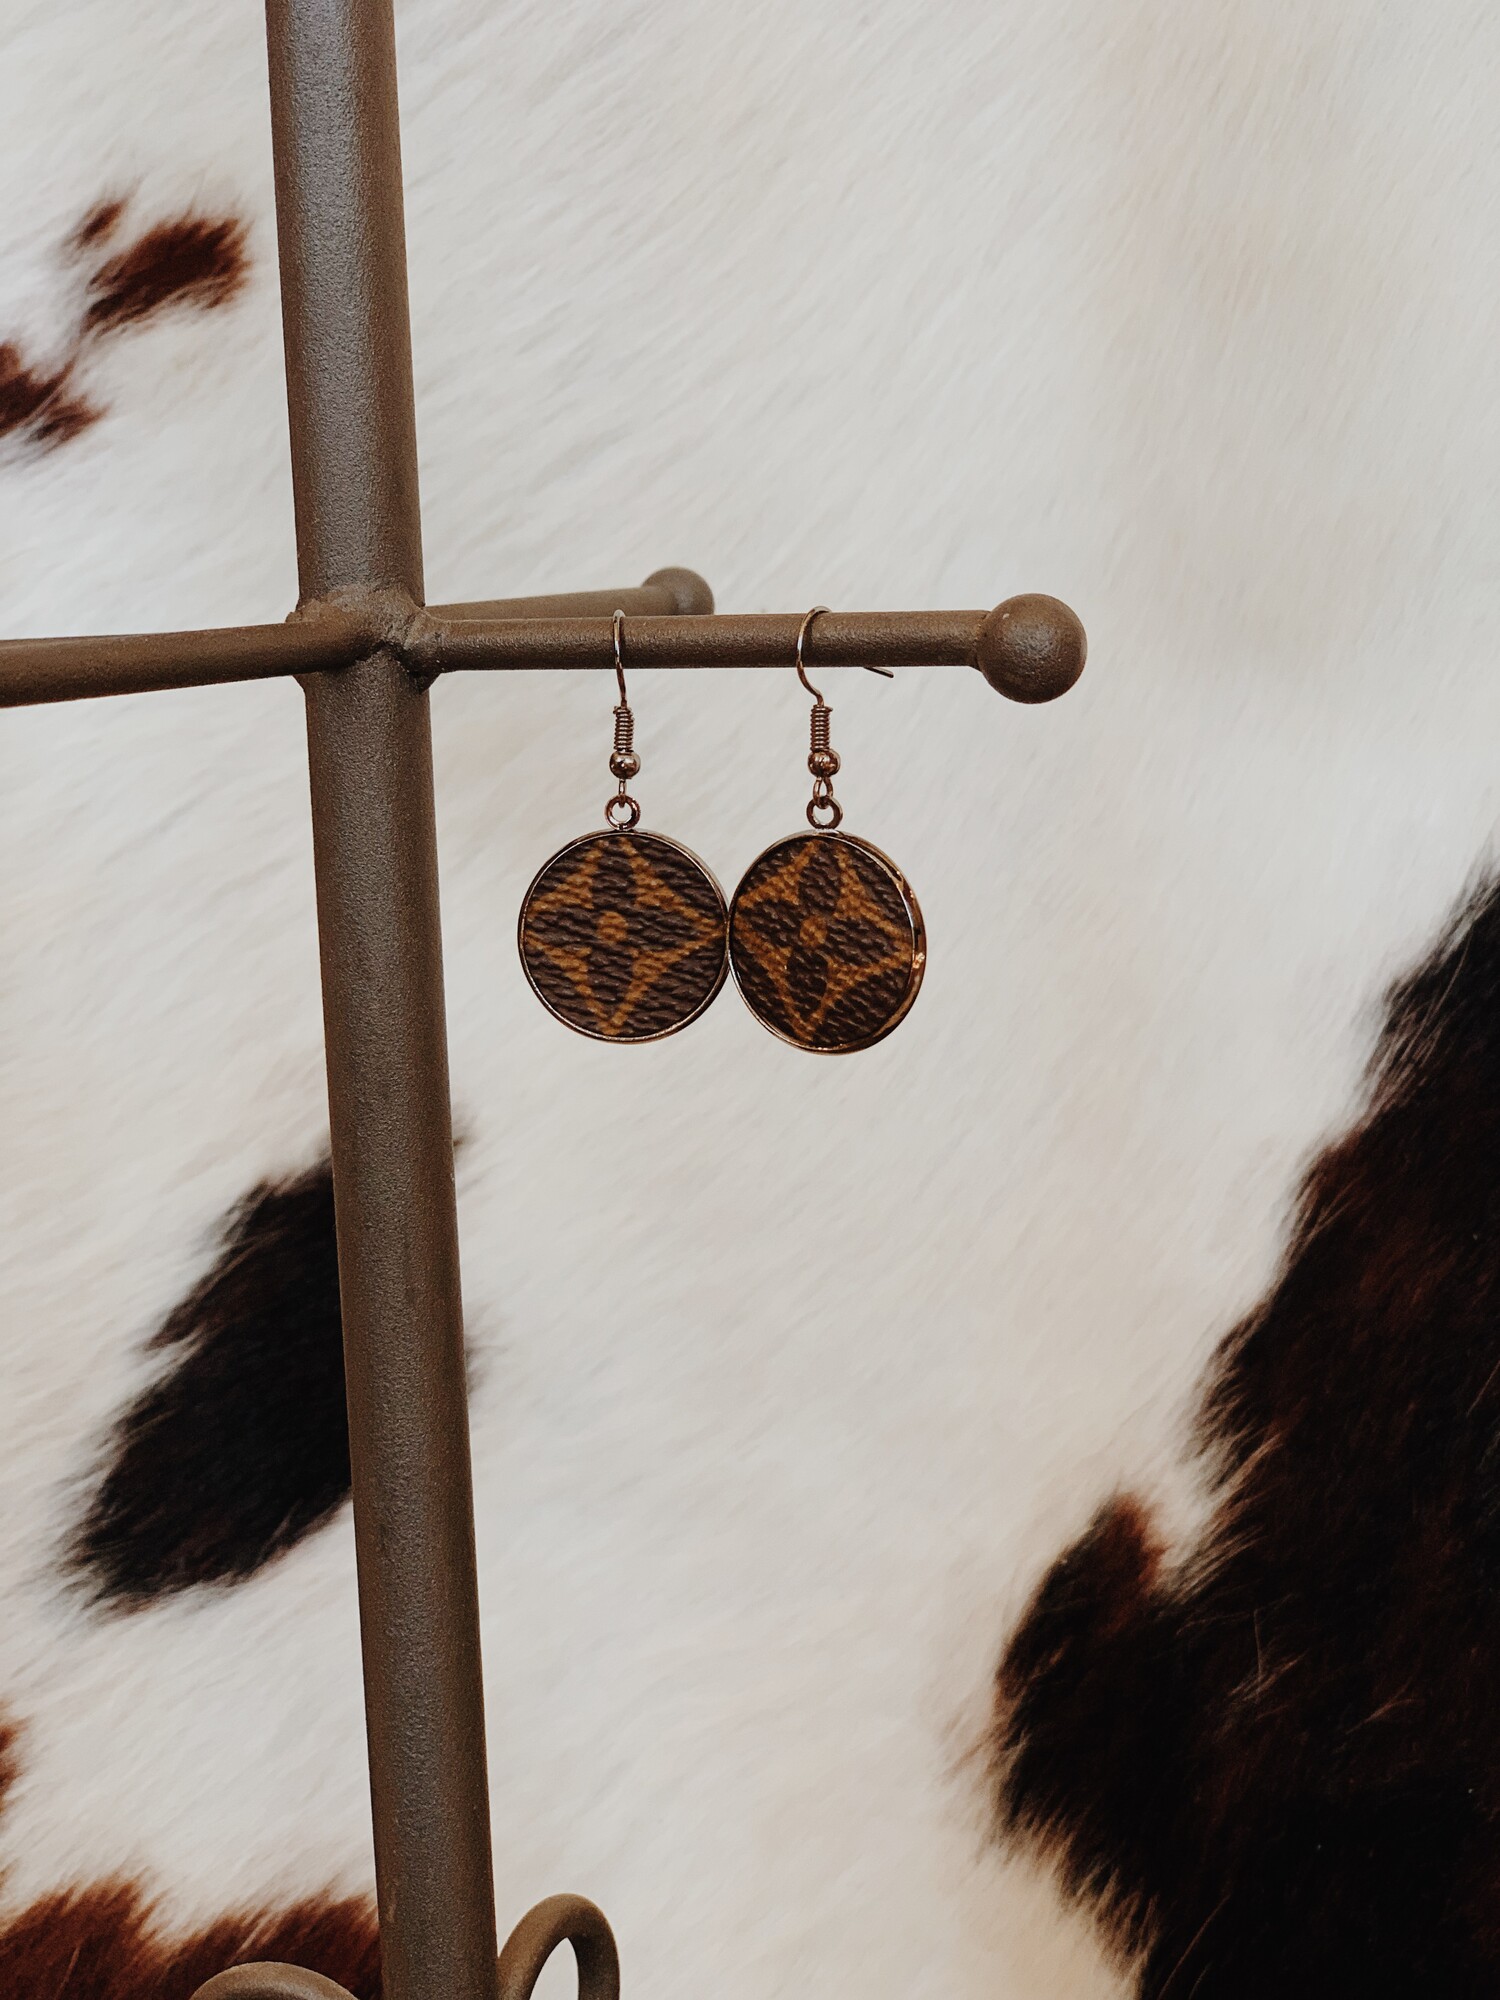 These adorable upcycled, handmade earrings were made from an authentic Louis Vuitton bag. The bag's date code is SP0927.

Resurrect Antiques is not affiliated with the LV company.